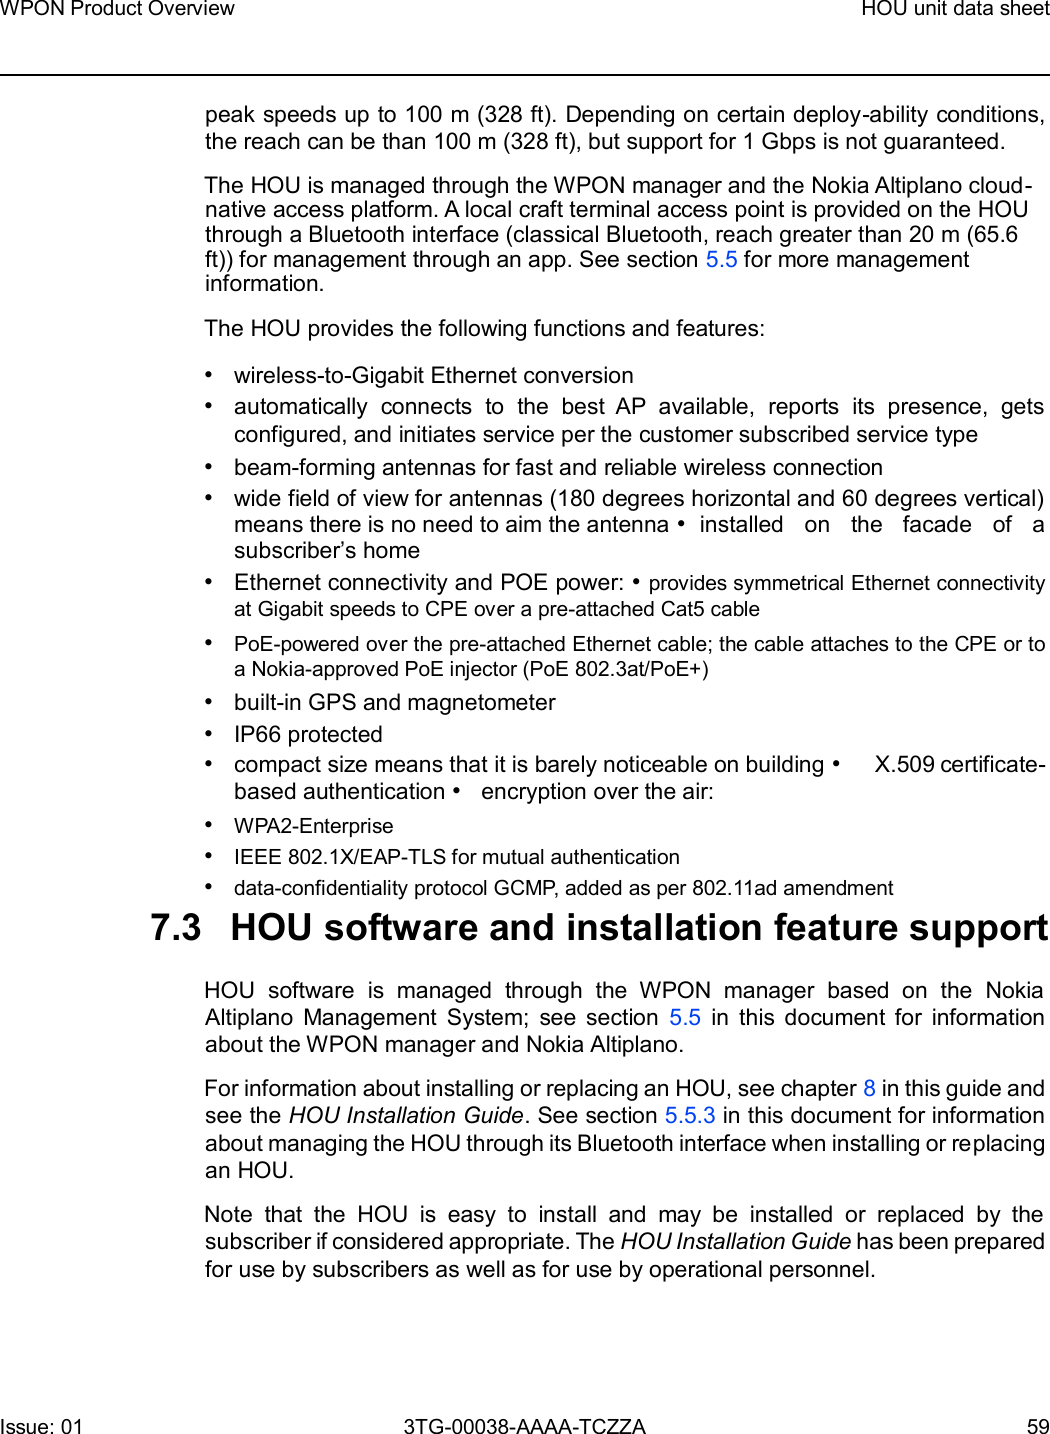 Page 59 of Nokia Bell 7577WPONAPAC WPON User Manual WPON Product Overview